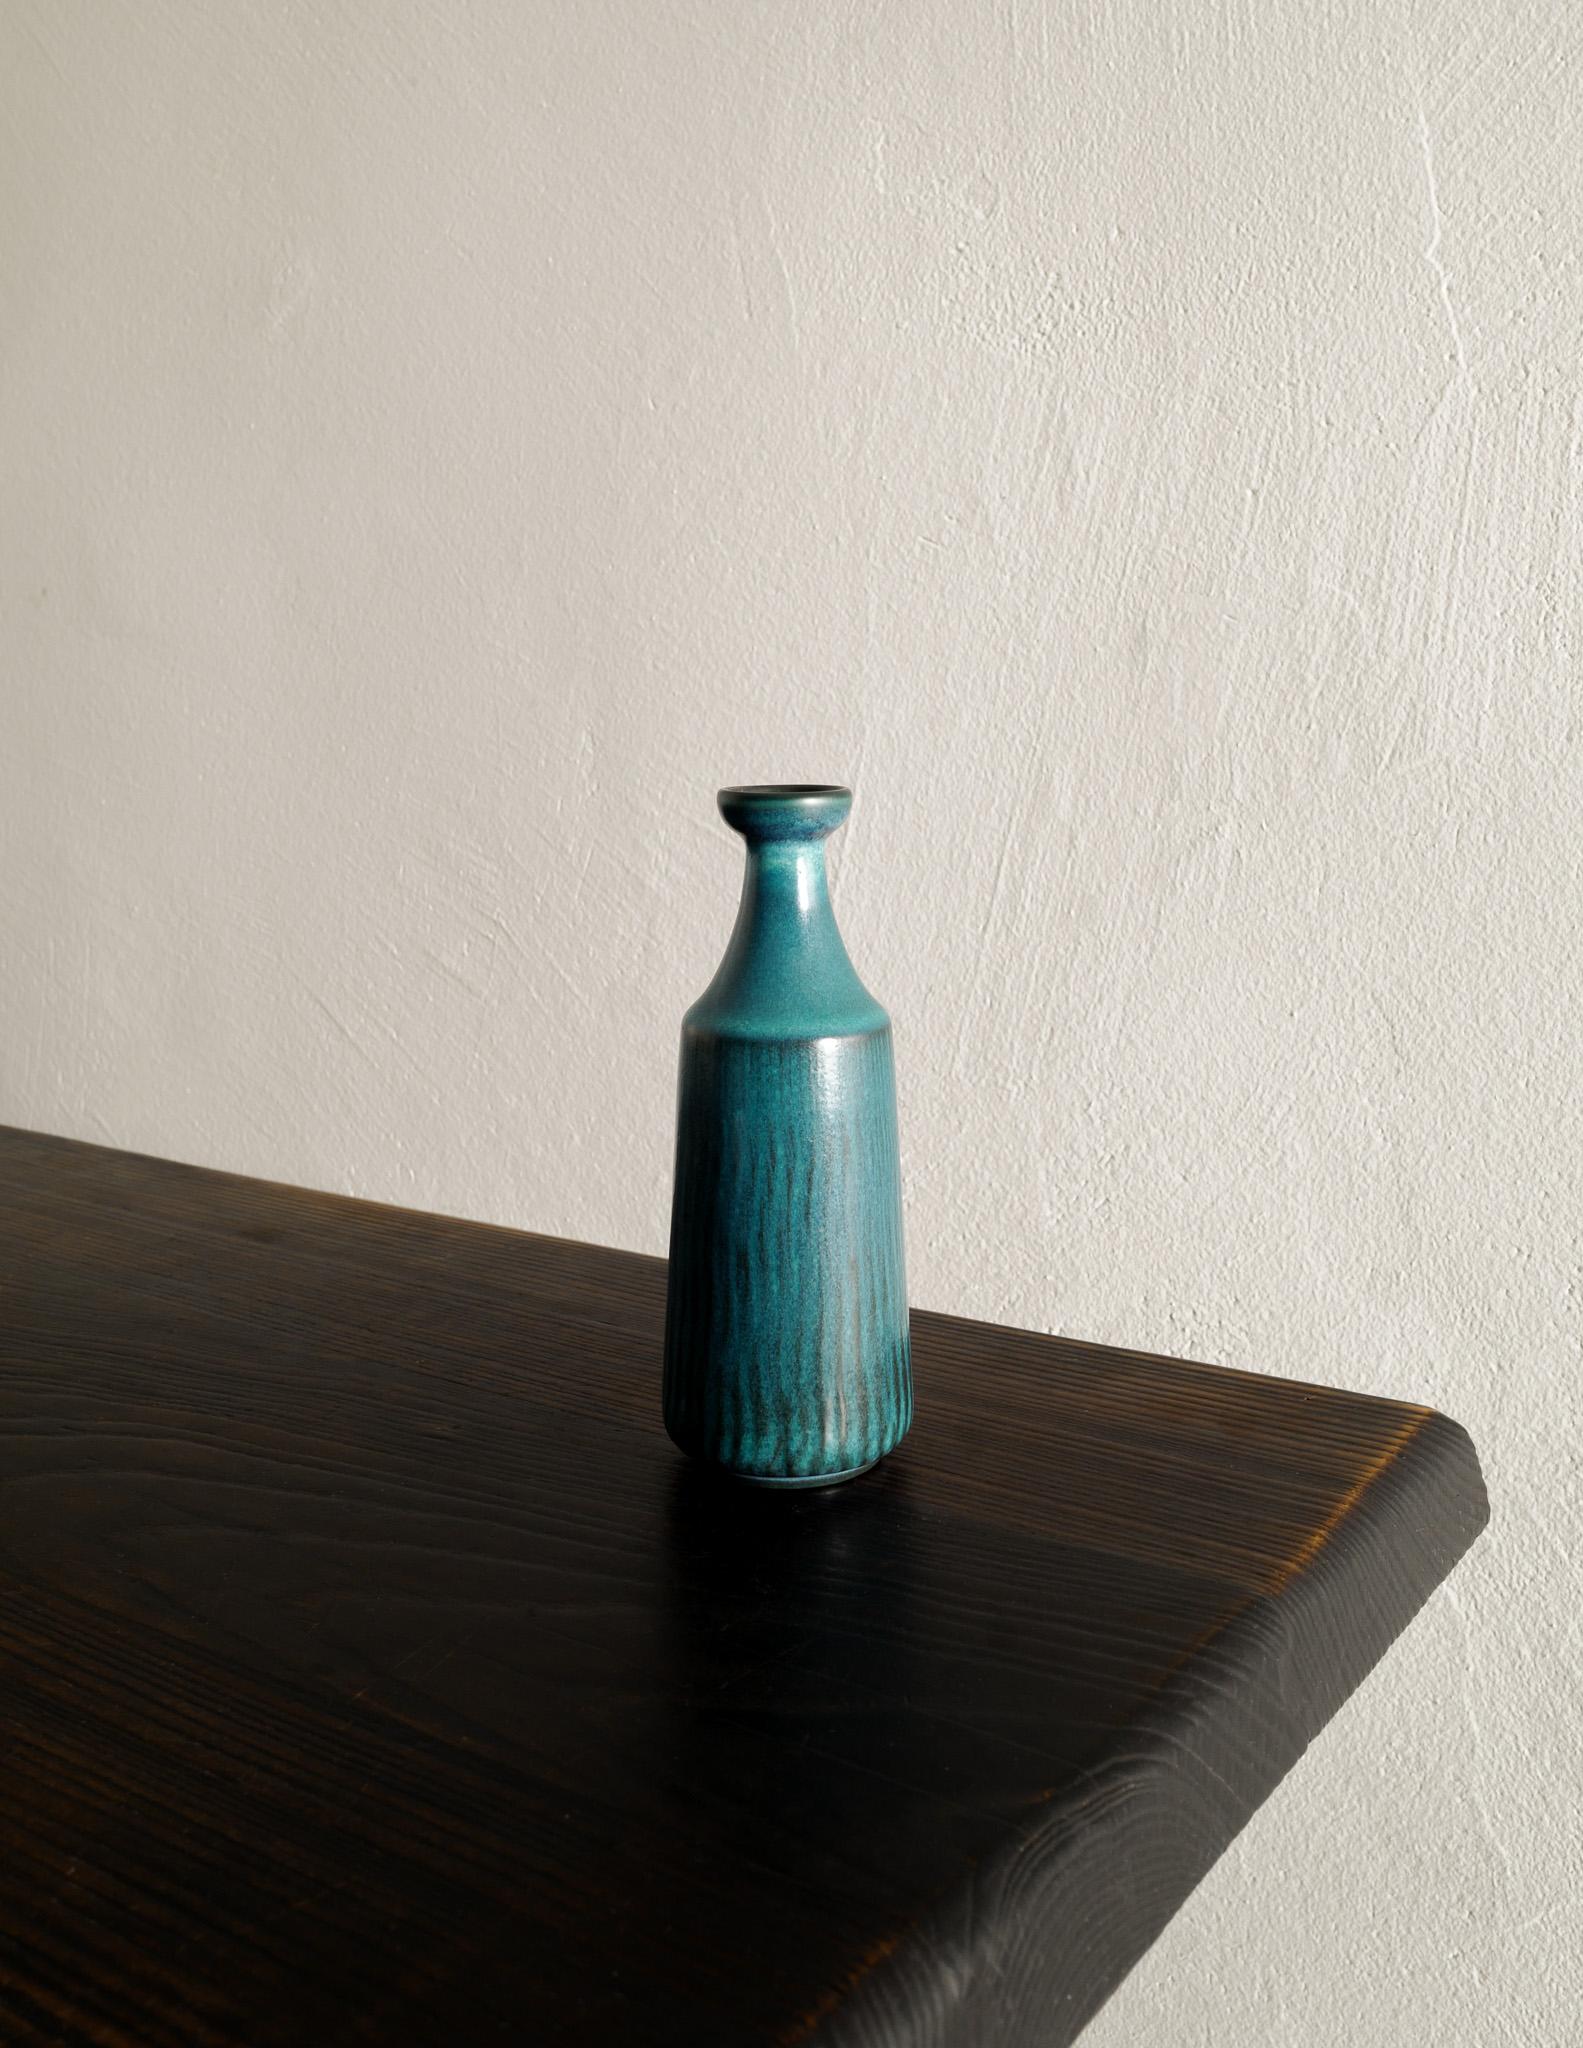 Rare blue / turquoise mid century vase designed and made by Gunnar Nylund for Nymølle, Denmark in the 1950s. In good original condition with minimal signs from age and use. Signed and stamped 